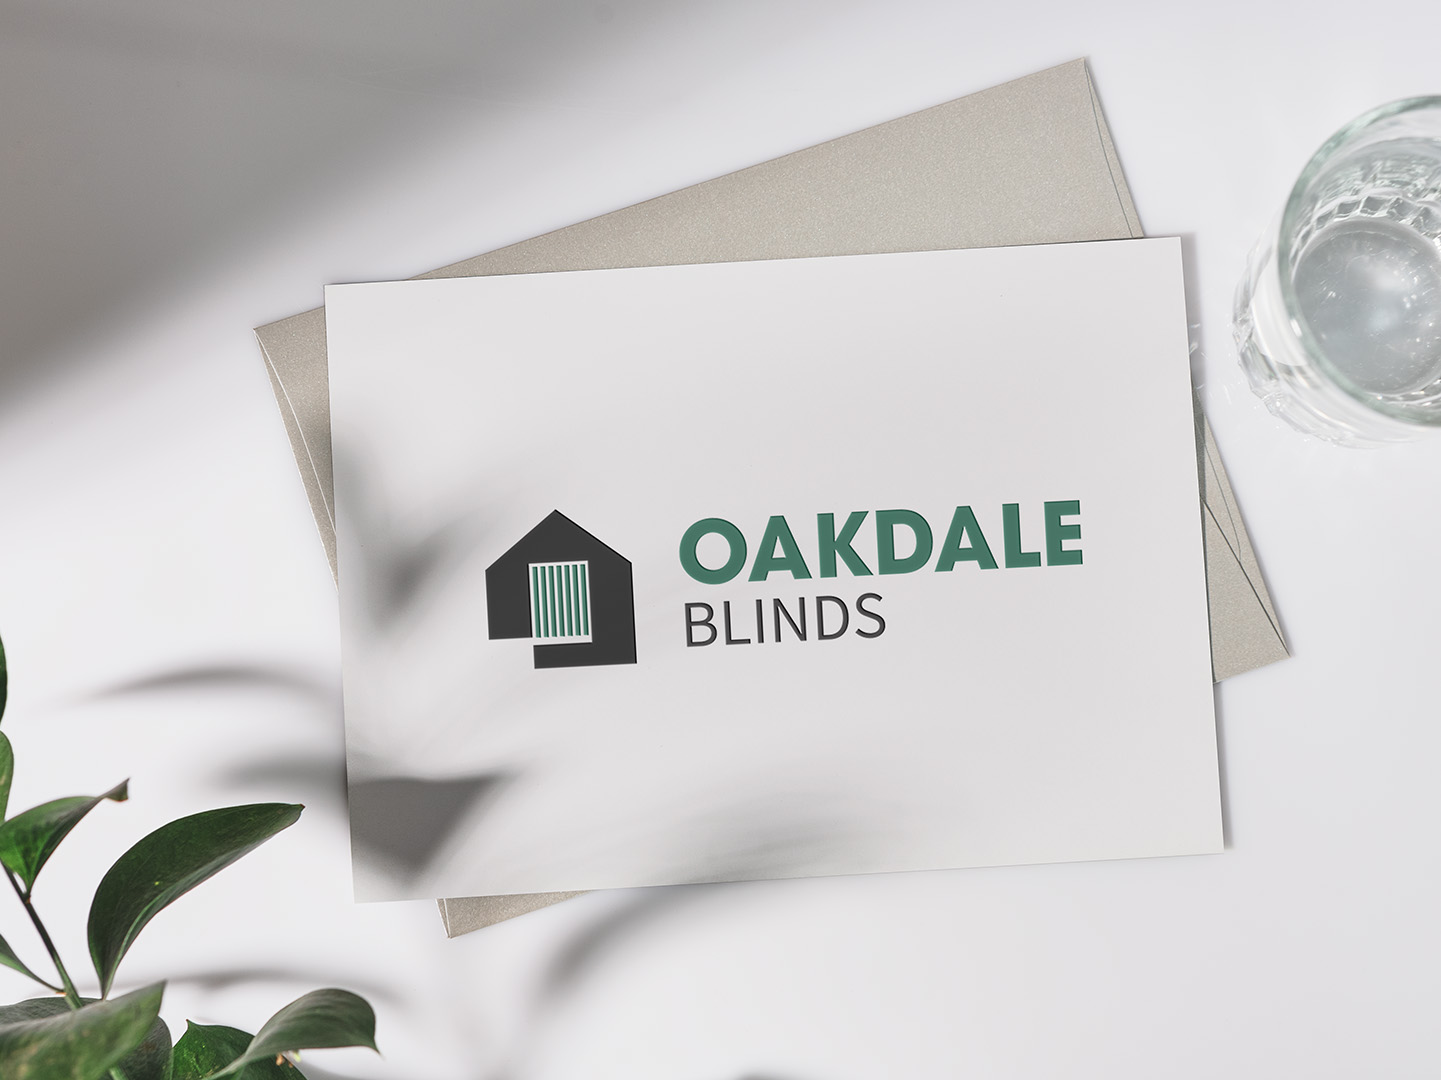 abstract house with blinds logo on a business card for oakdale blinds